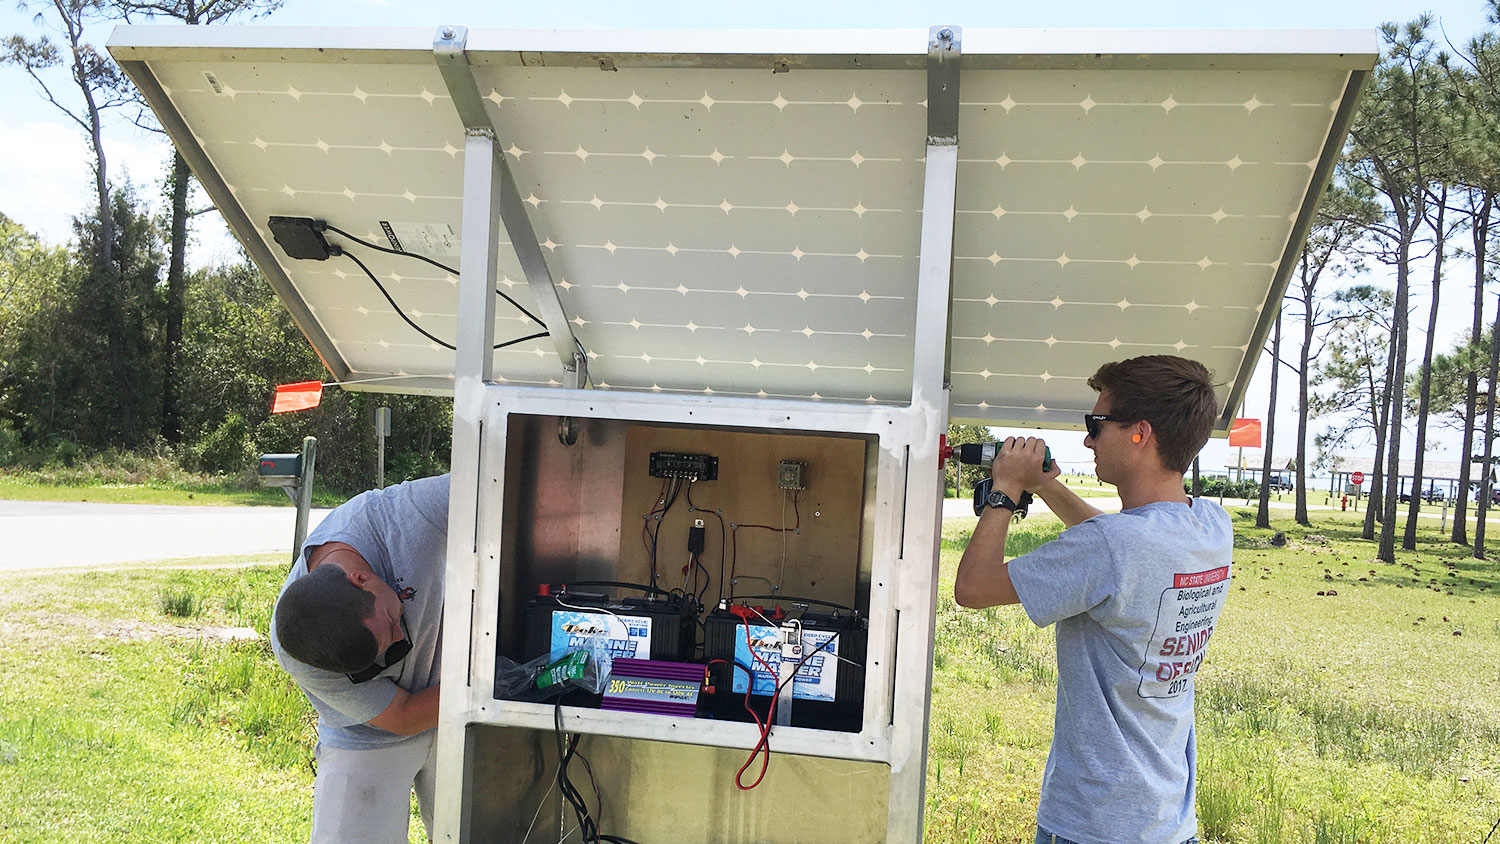 BAE senior design students work on the solar-powered pump they built and installed on Harkers Island